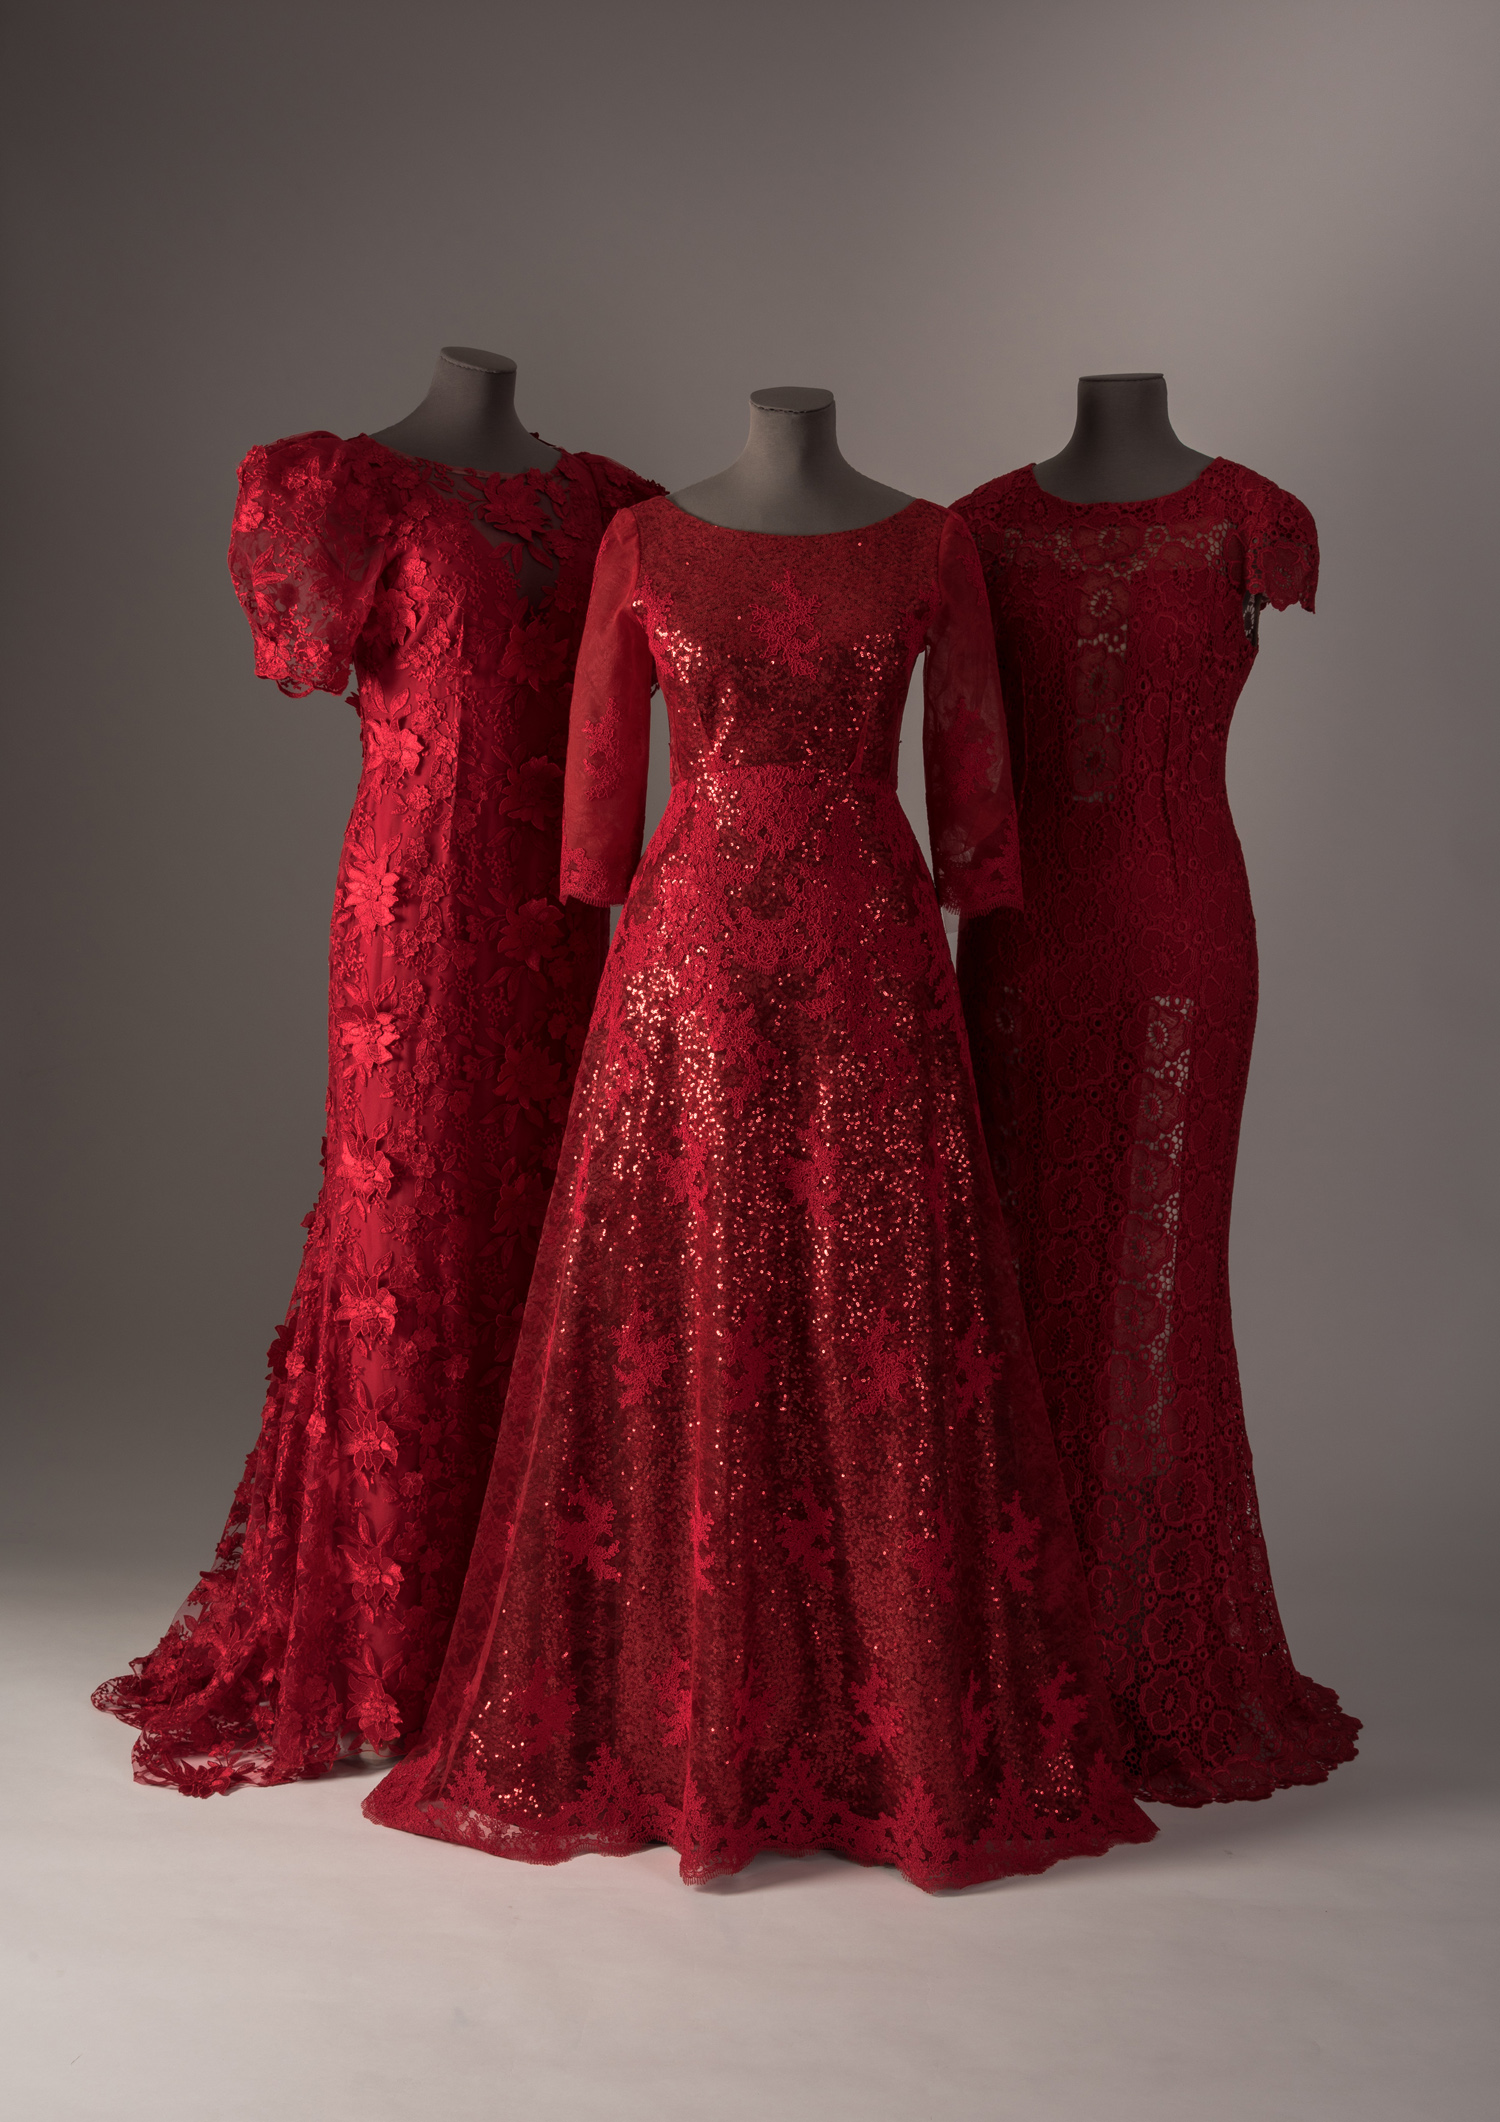 Exhibition Review: Lace in Fashion — The Fashion Studies Journal